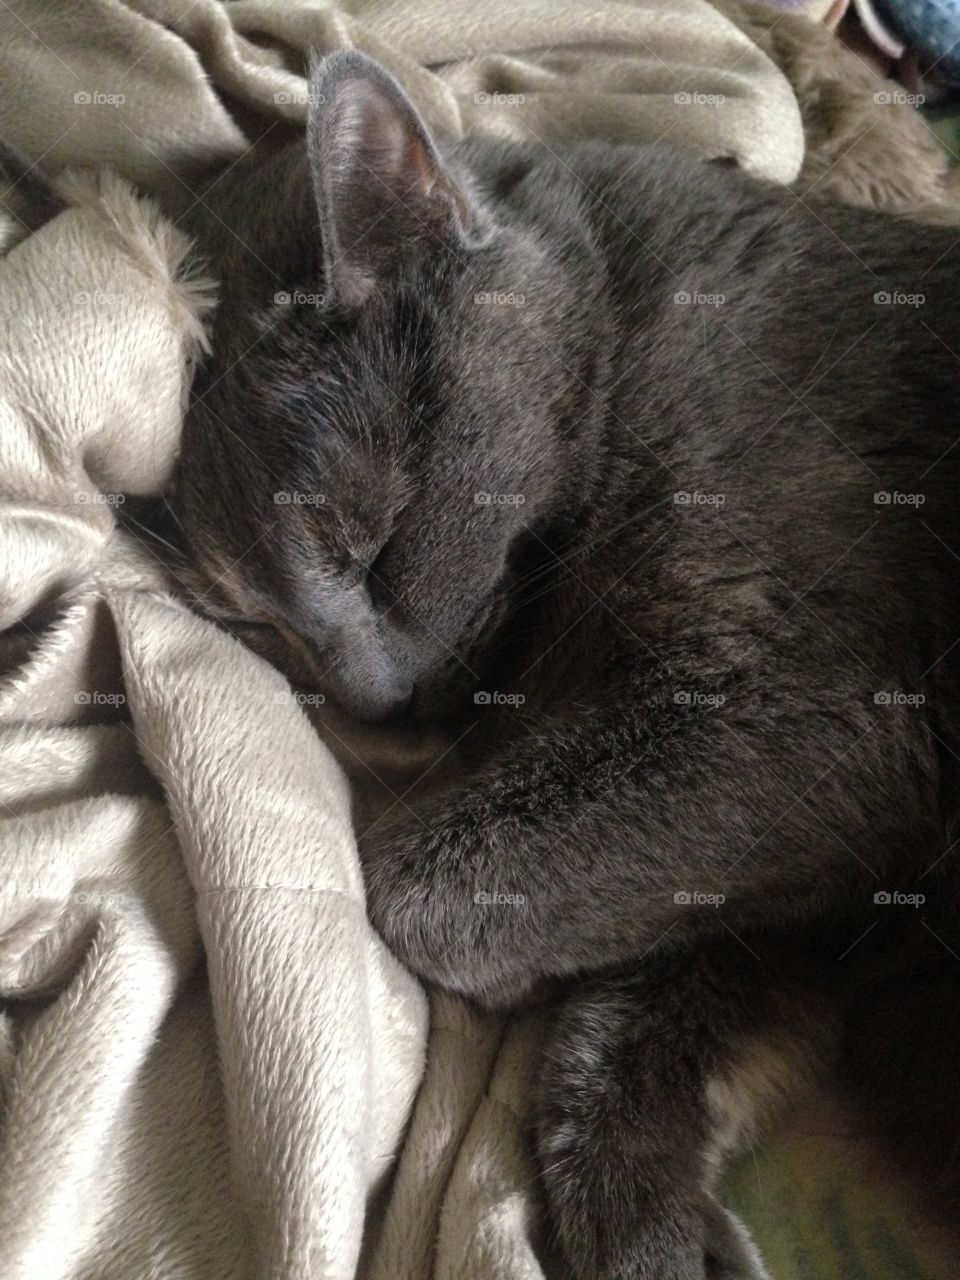 Kitty Love. Kitty snuggles are adorable with this Russian Blue. 